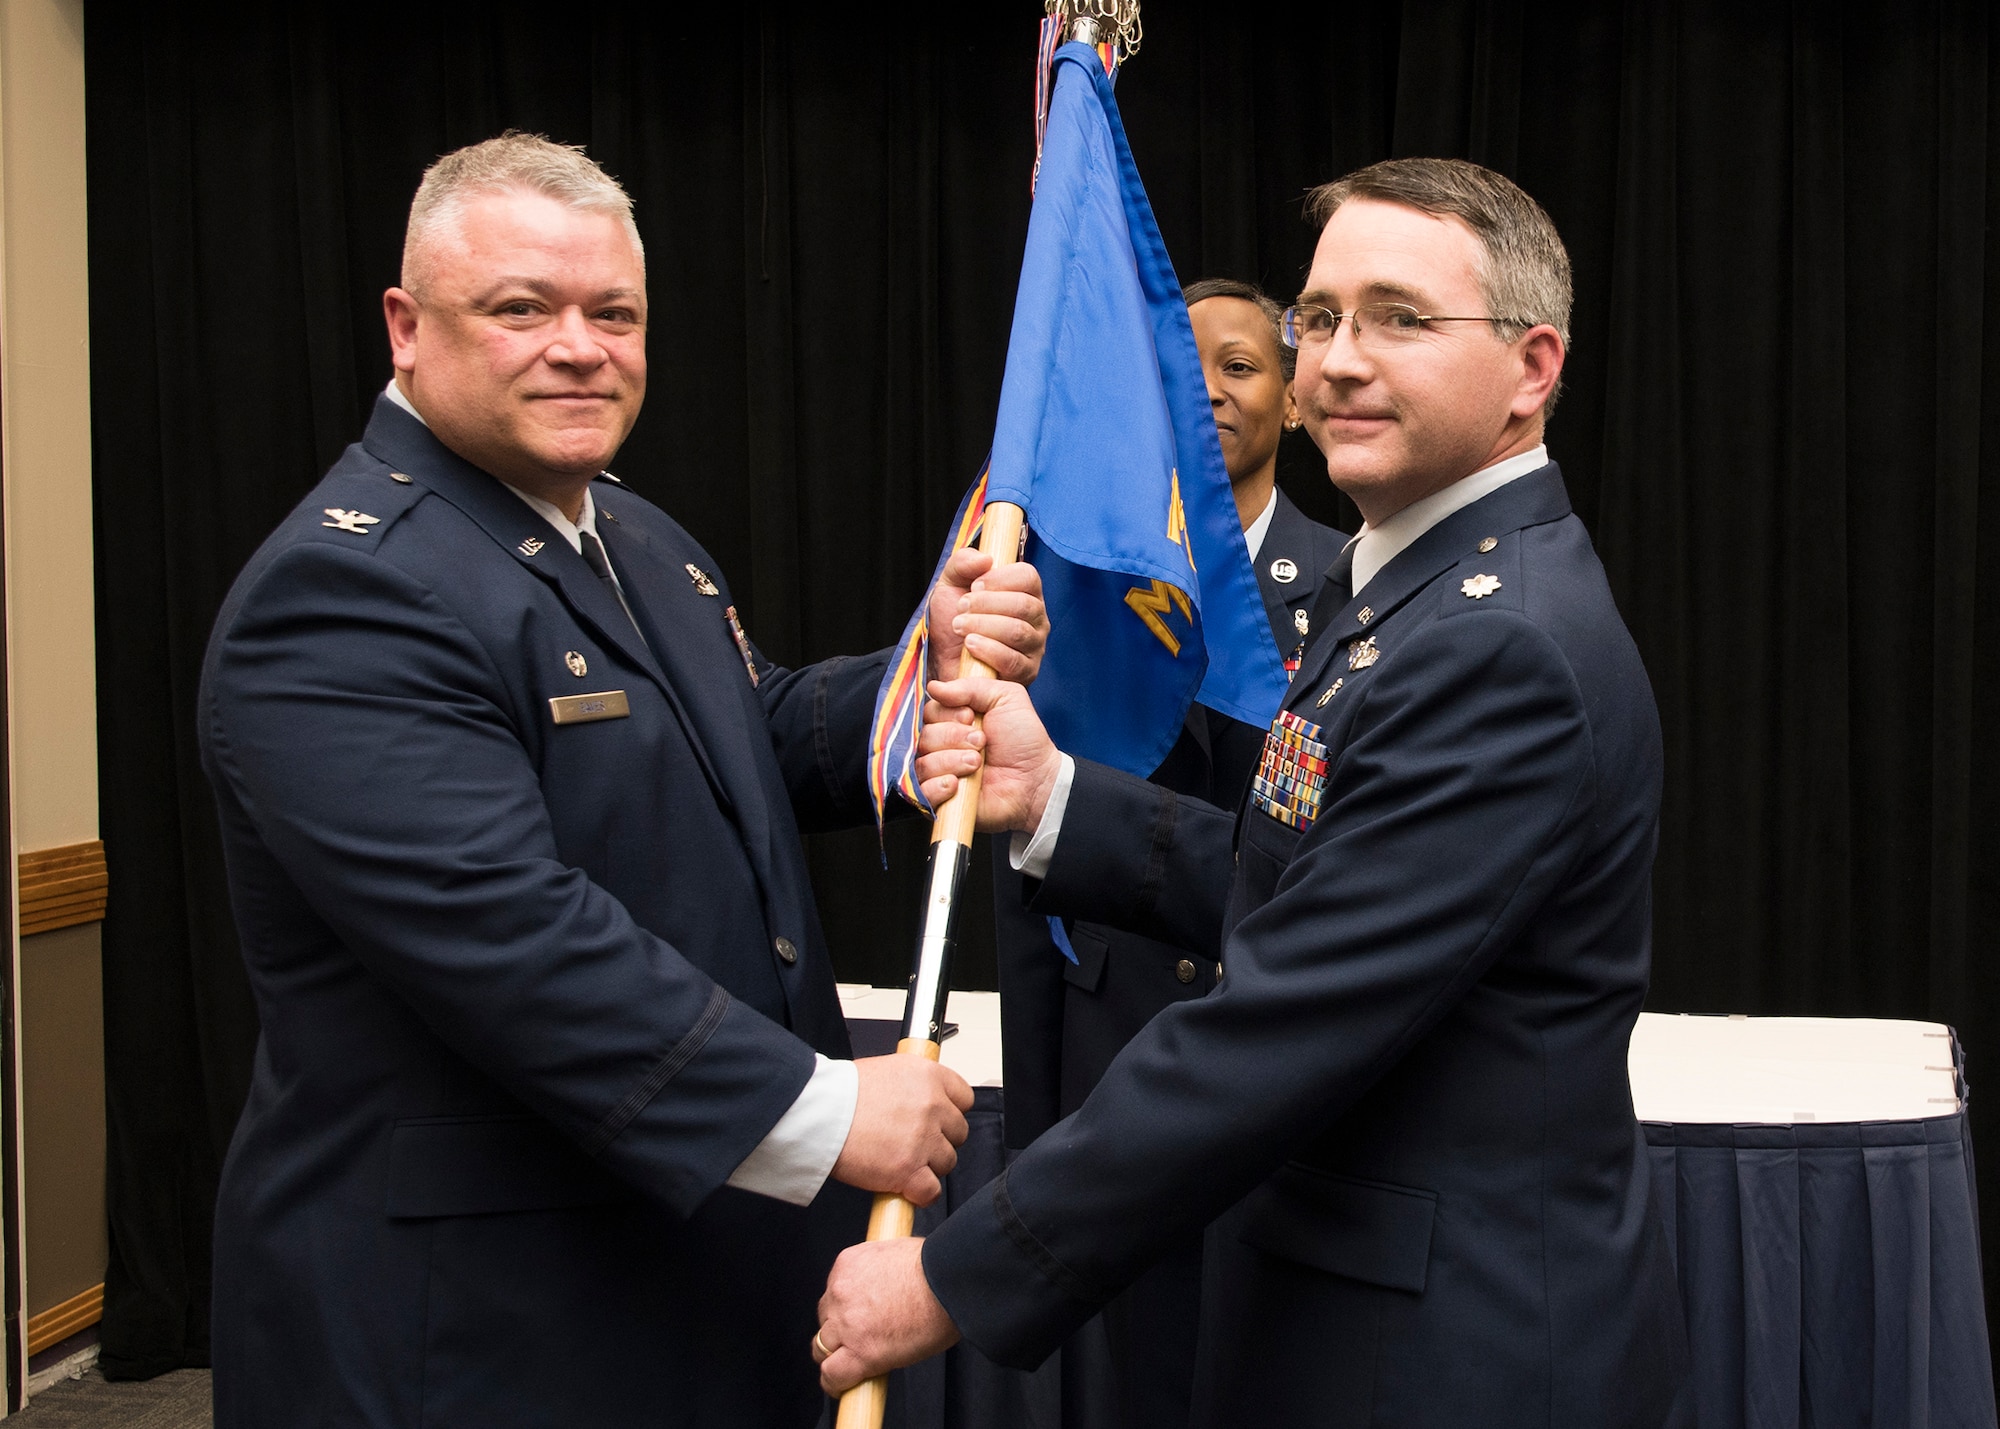 Lt. Col Russell Kohl receives the Medical Group guidon from Col Ken Eaves, 131st Bomb Wing Commander, during the change of command ceremony at Whiteman Air Force Base, Dec. 2. Kohl assumes command from Col. Patti Fries, who continues her military service as the commander of the Nebraska Air National Guard’s 155th Medical Group, a subordinate unit of the 155th Air Refueling Wing, at Lincoln Air National Guard Base.  (U.S. Air National Guard photo by Airman 1st Class Joseph Geldermann)